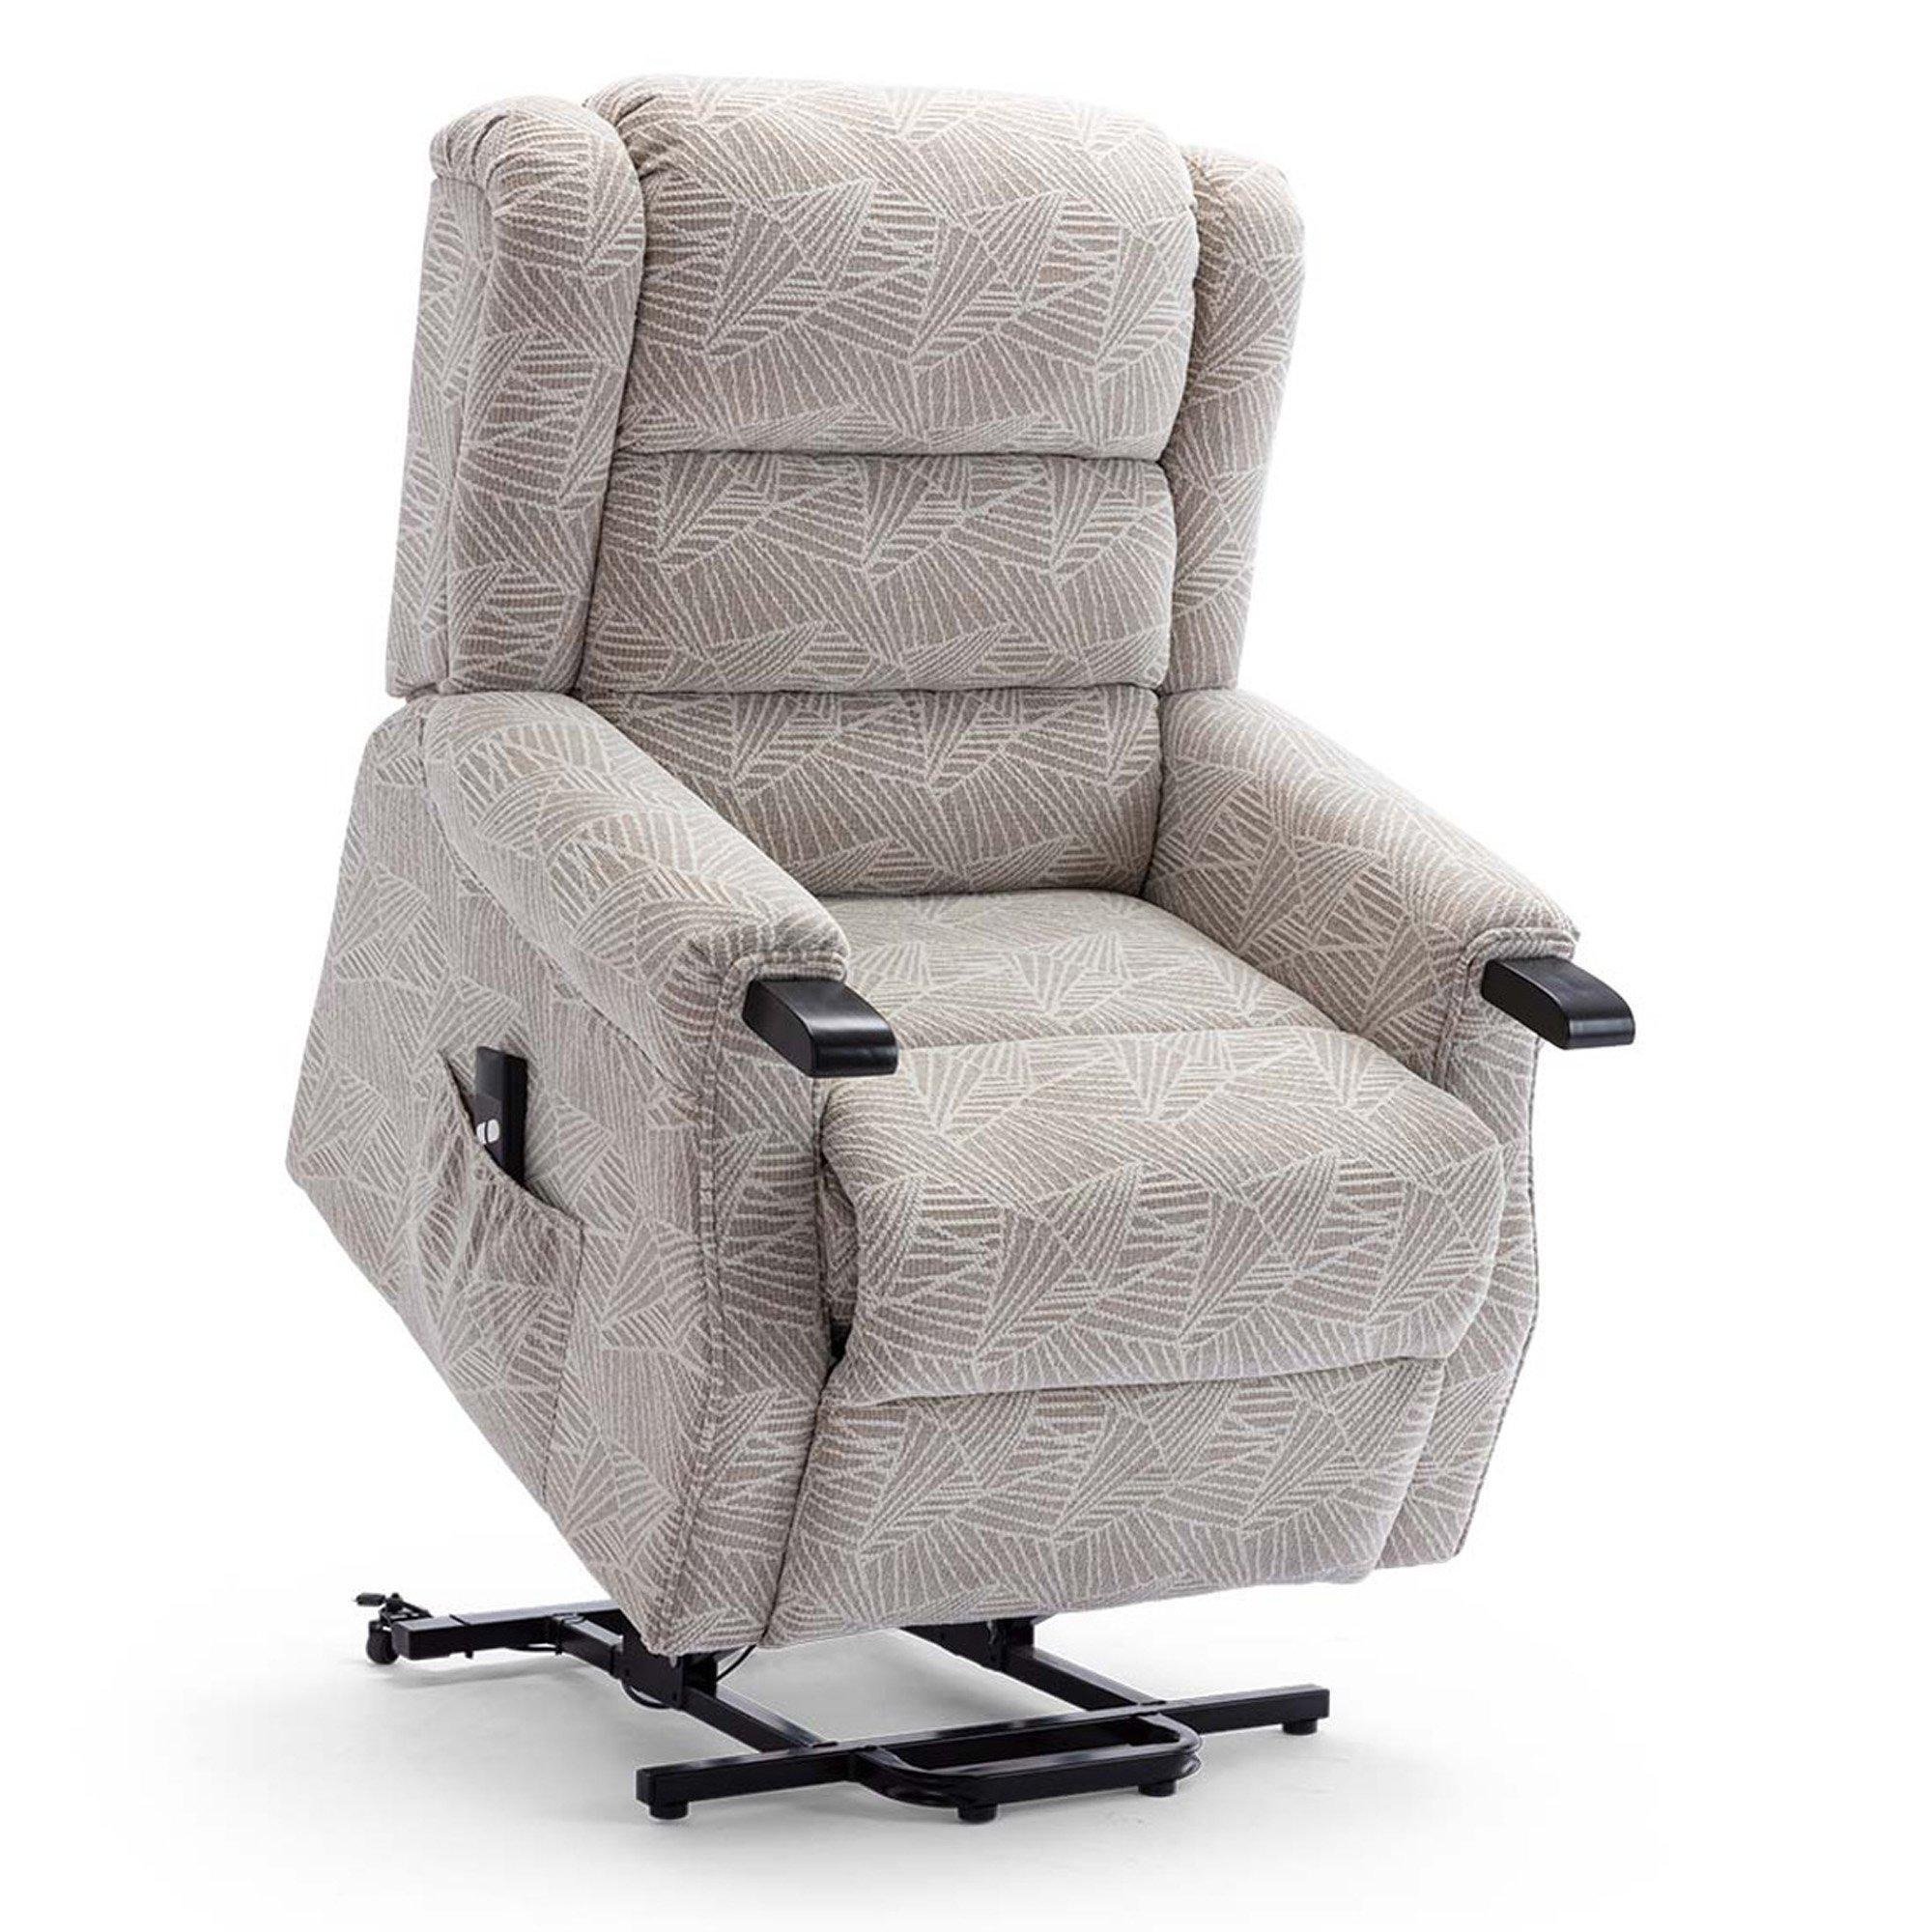 Ashfield Electric Fabric Single Motor Rise Recliner Mobility Chair - image 1